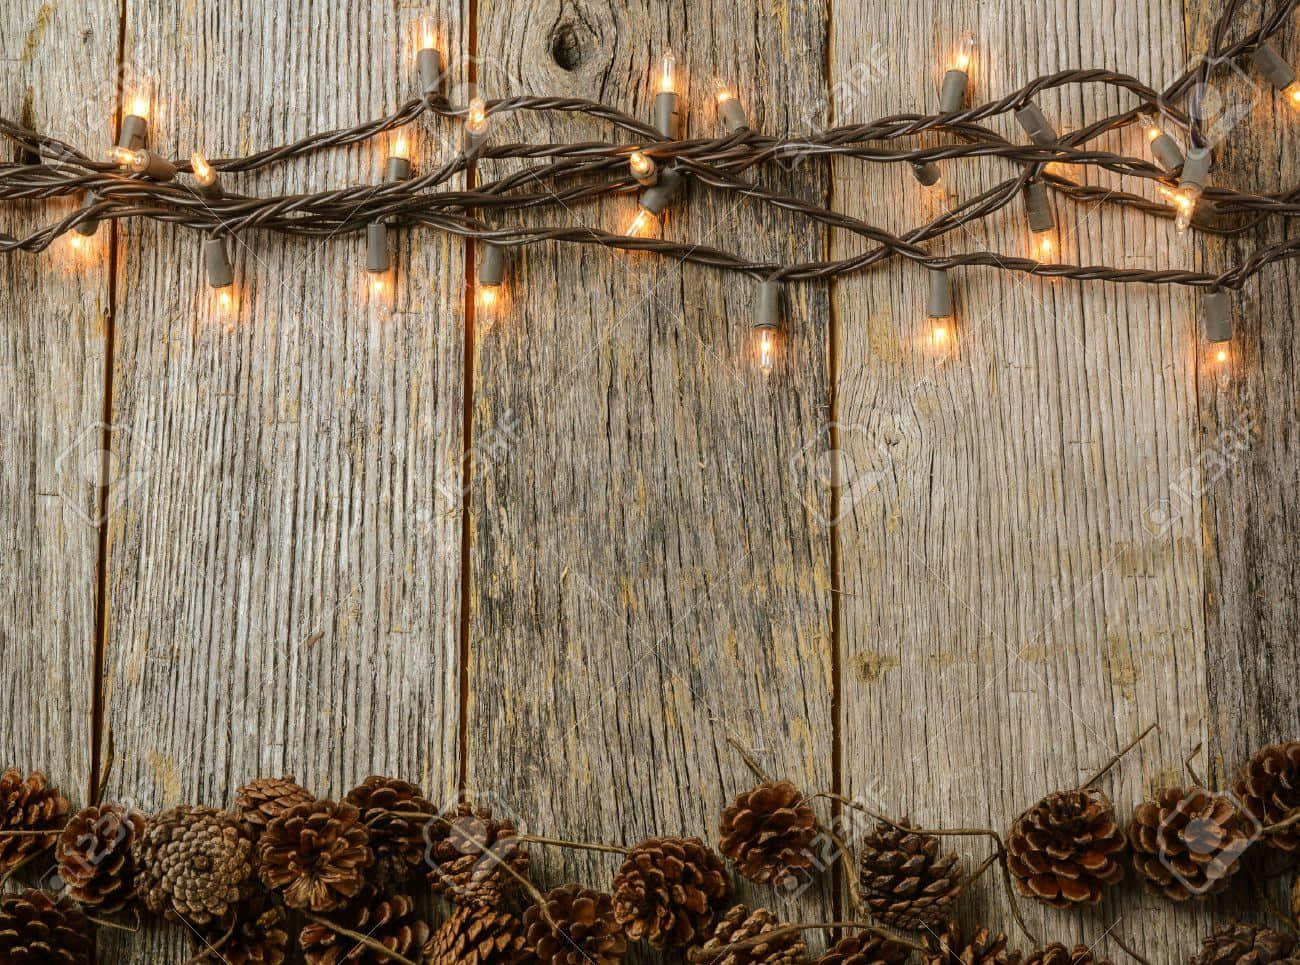 Celebrate the Holiday Season with a Rustic Christmas